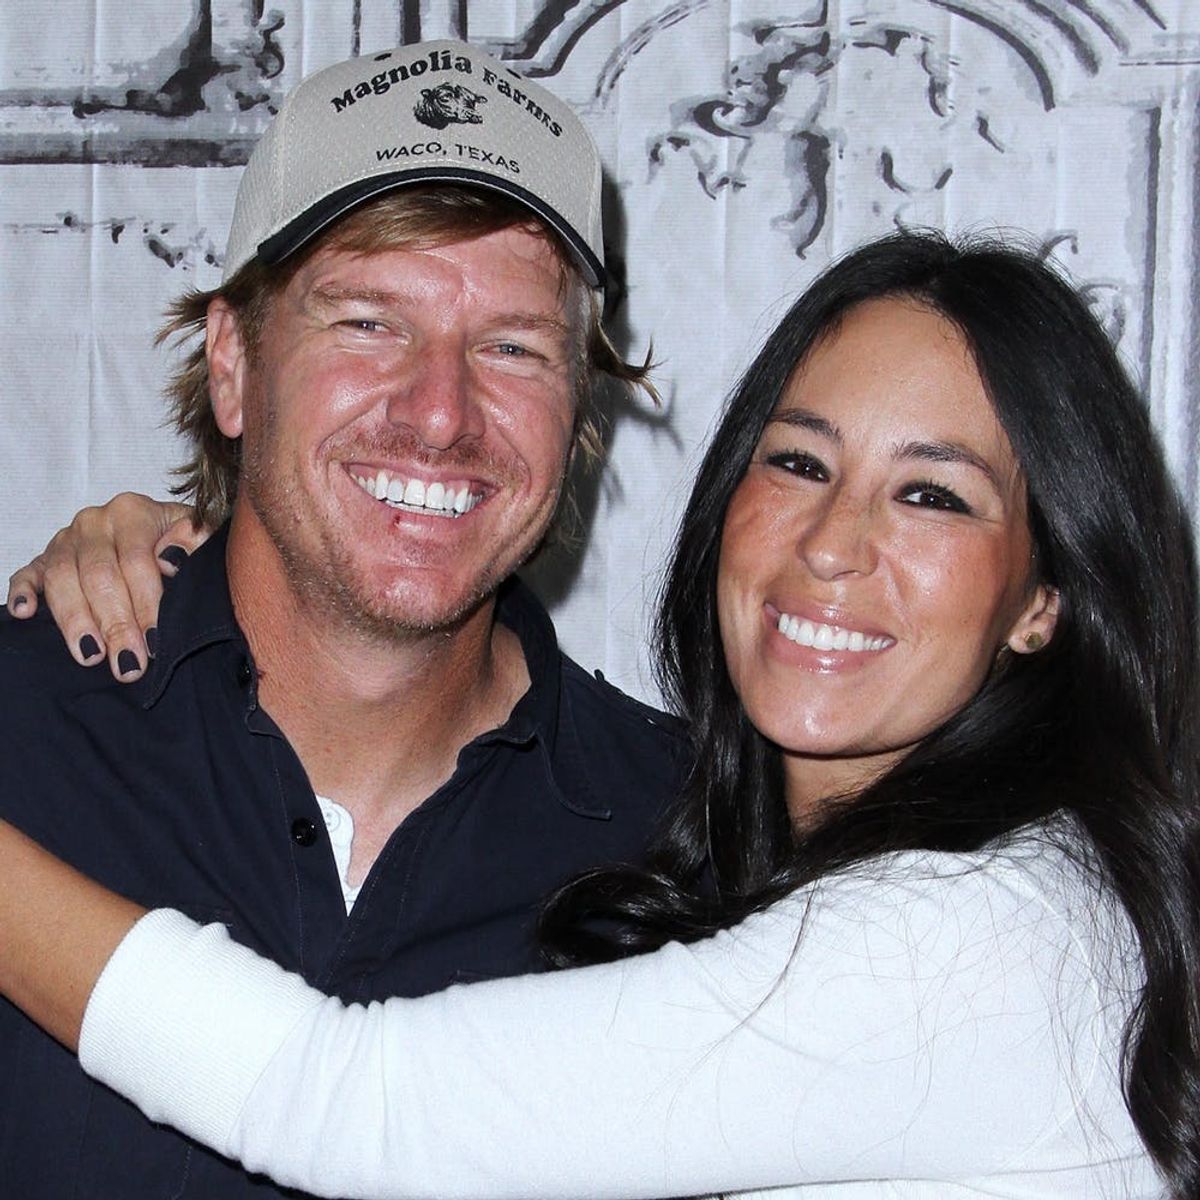 Chip and Joanna Gaines Are As Emotional About the End of “Fixer Upper” As We Are